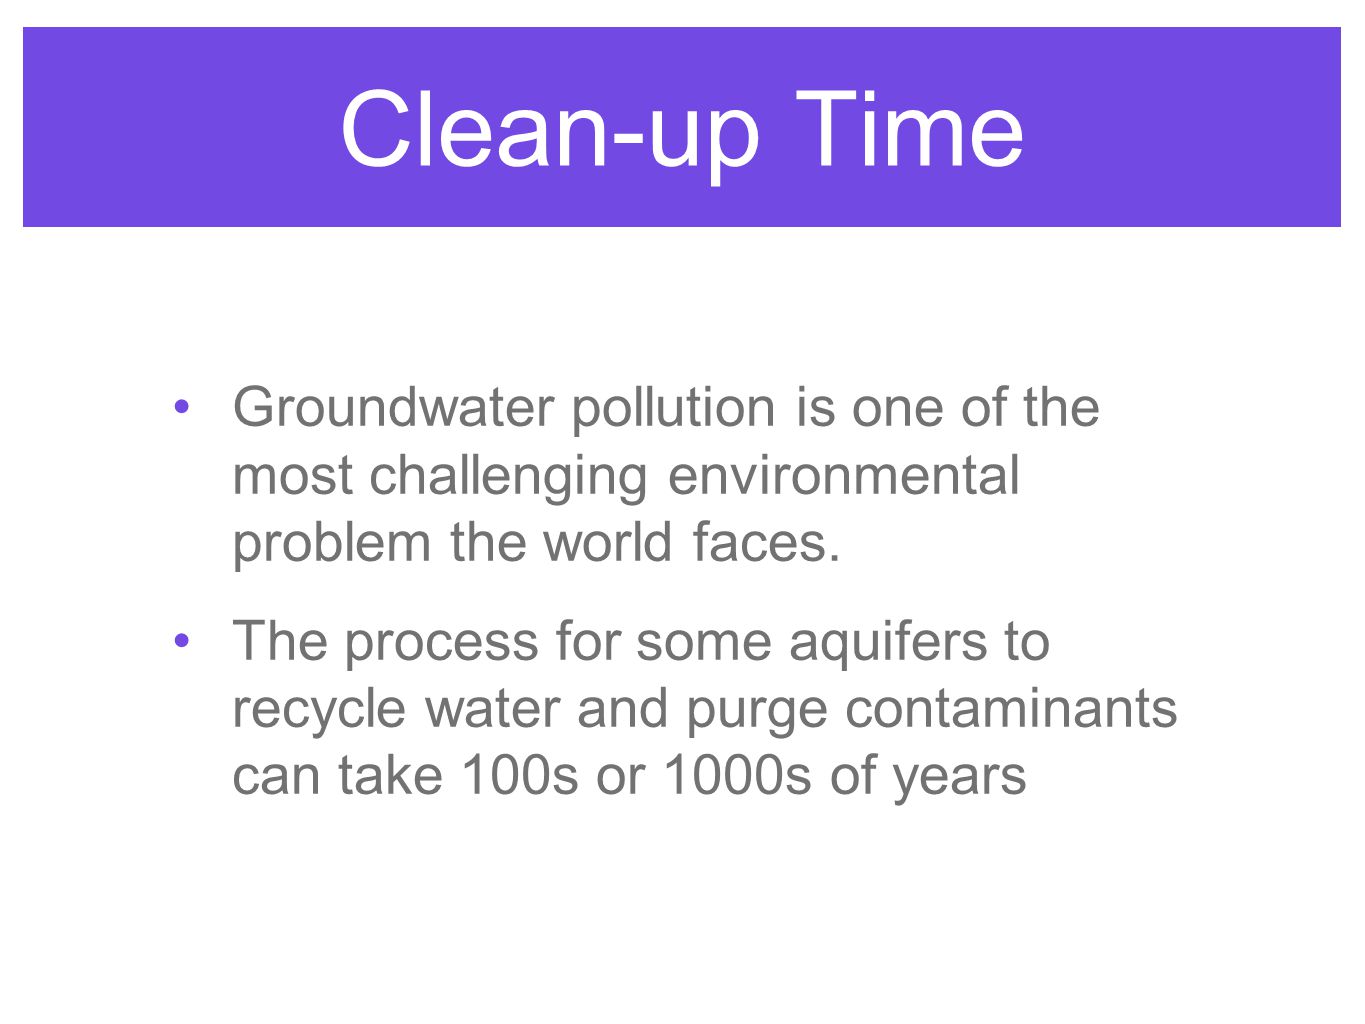 Clean-up Time Groundwater pollution is one of the most challenging environmental problem the world faces.